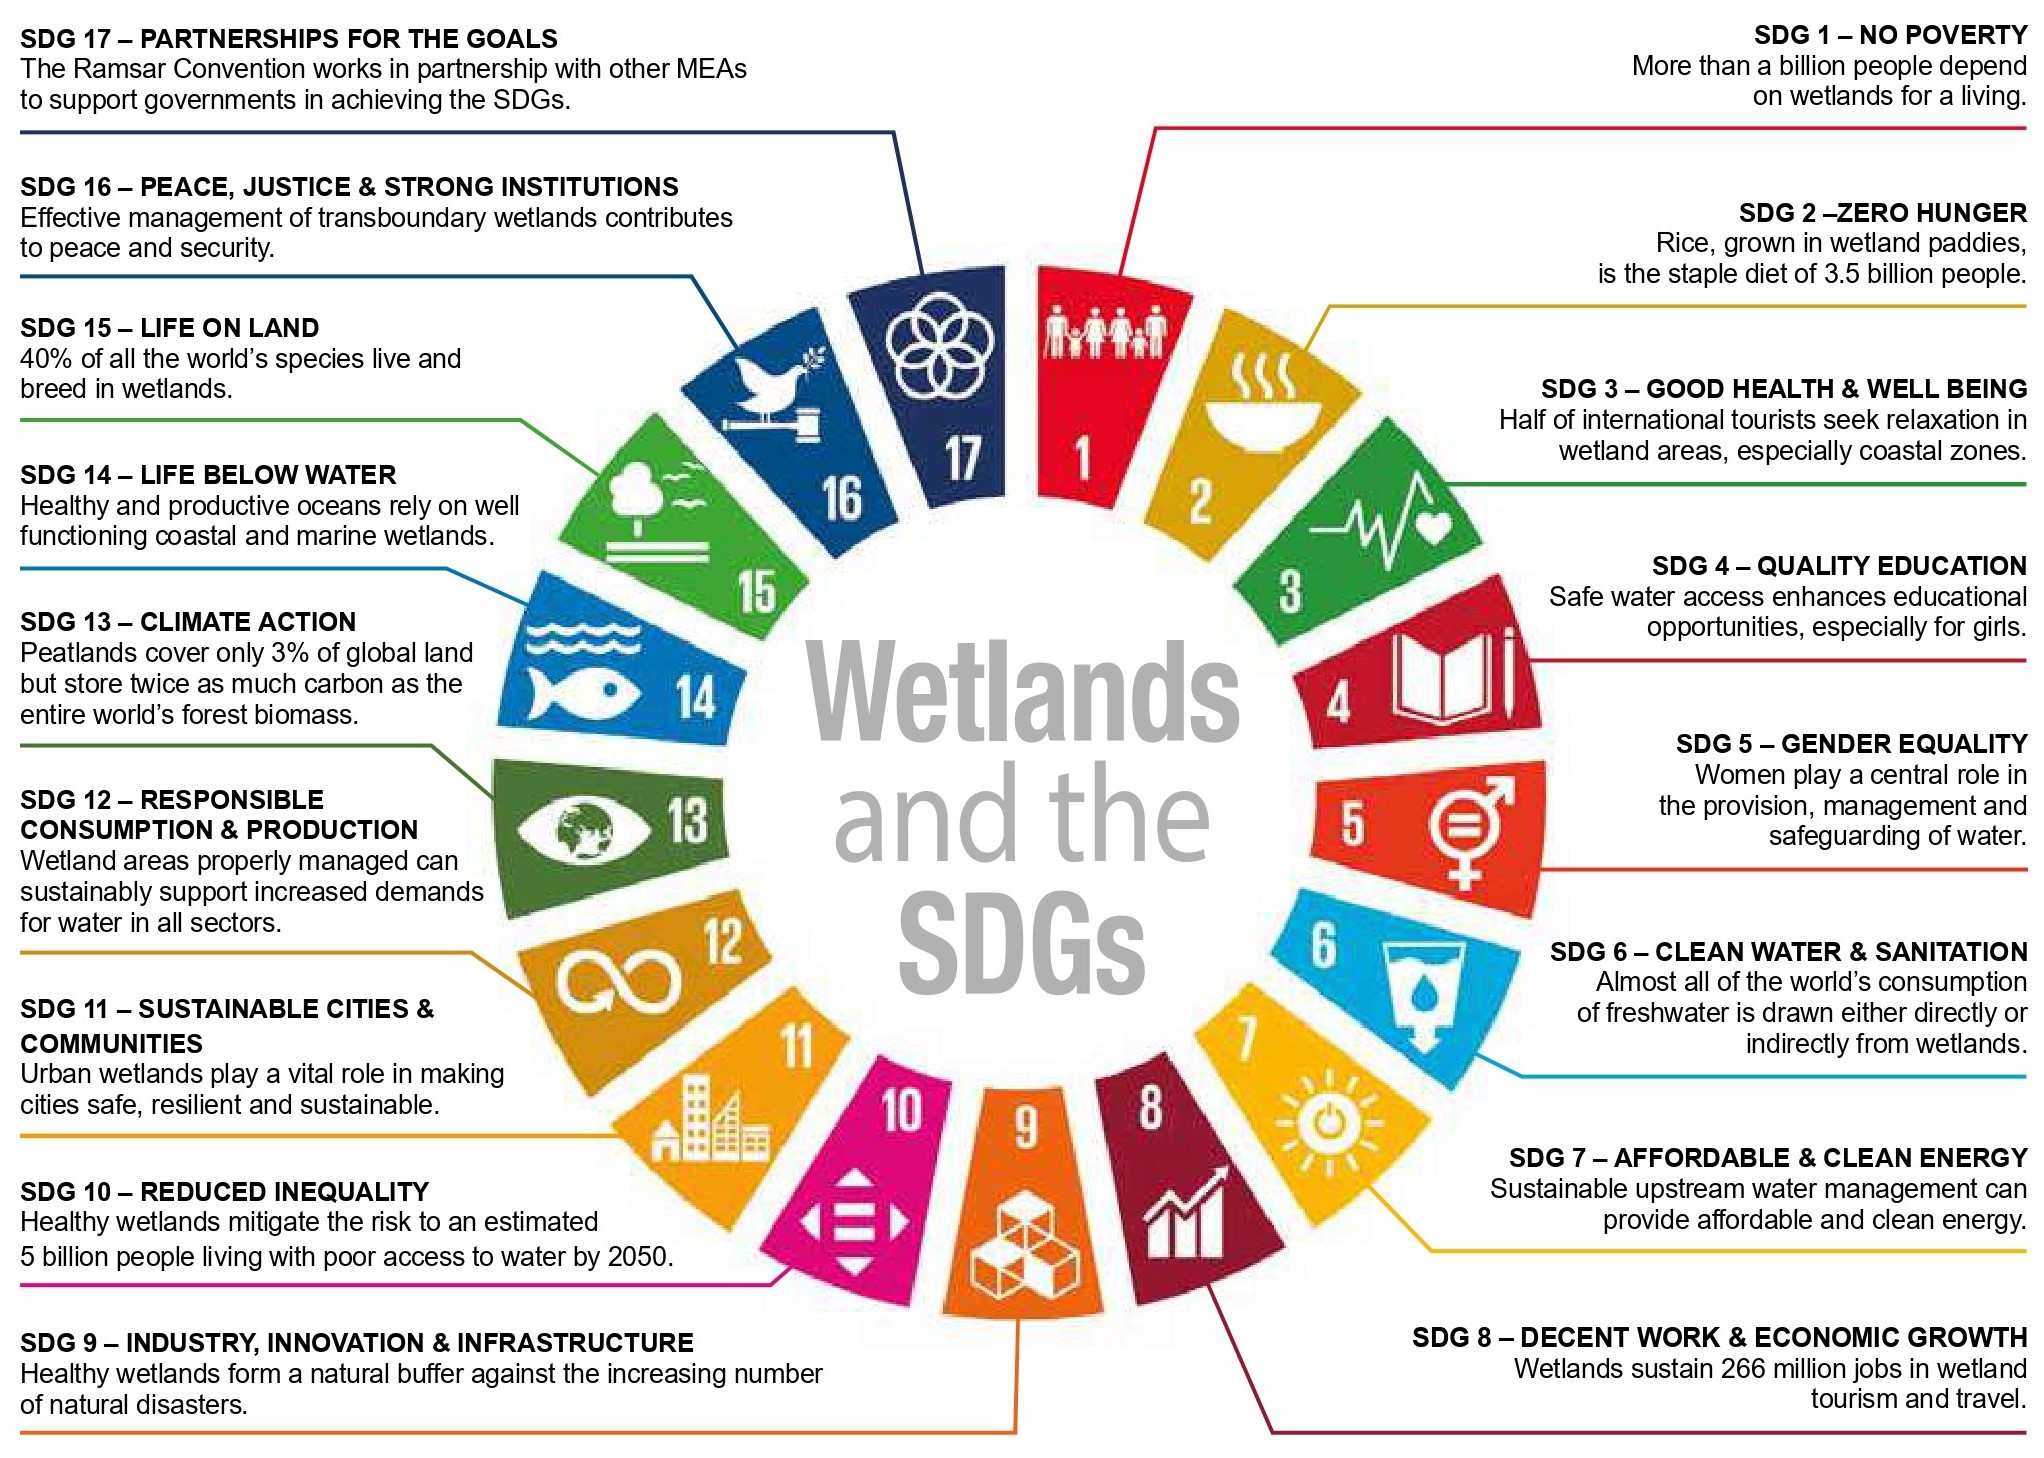 wetlands Mitigation and Adaptation to climate change